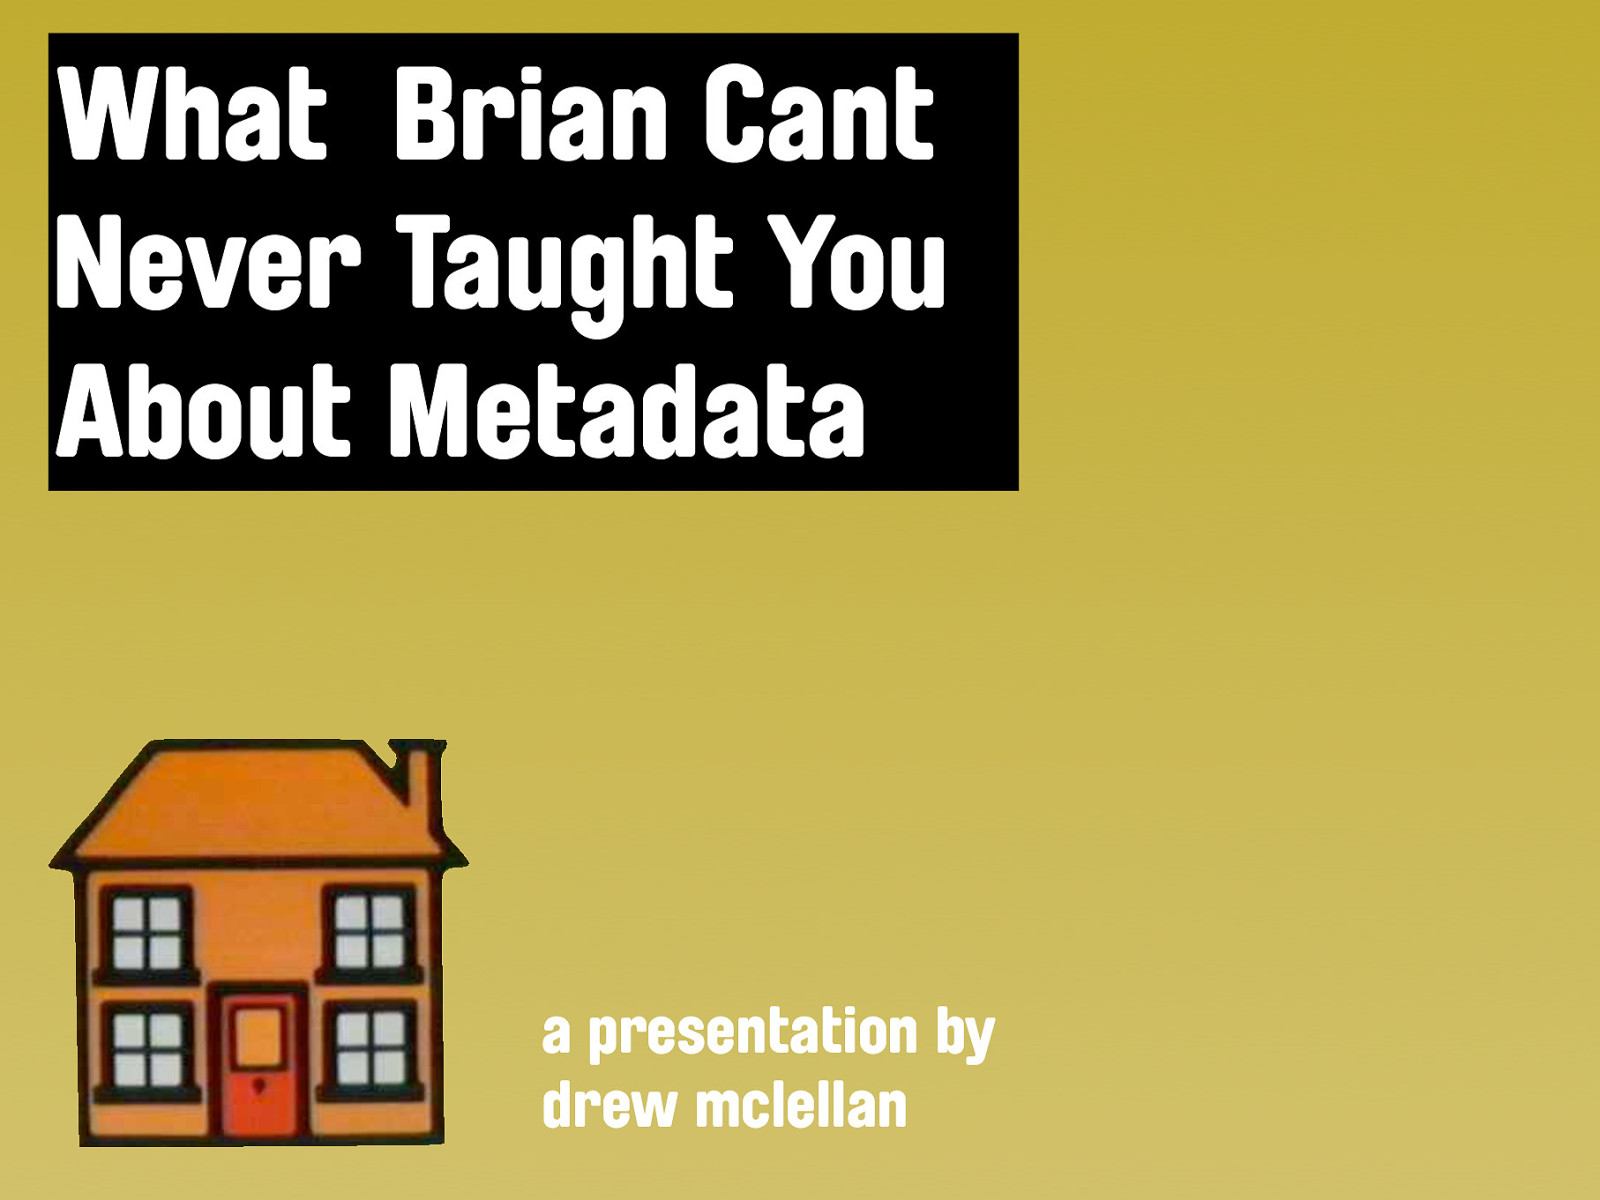 What Brian Cant Never Taught You About Metadata